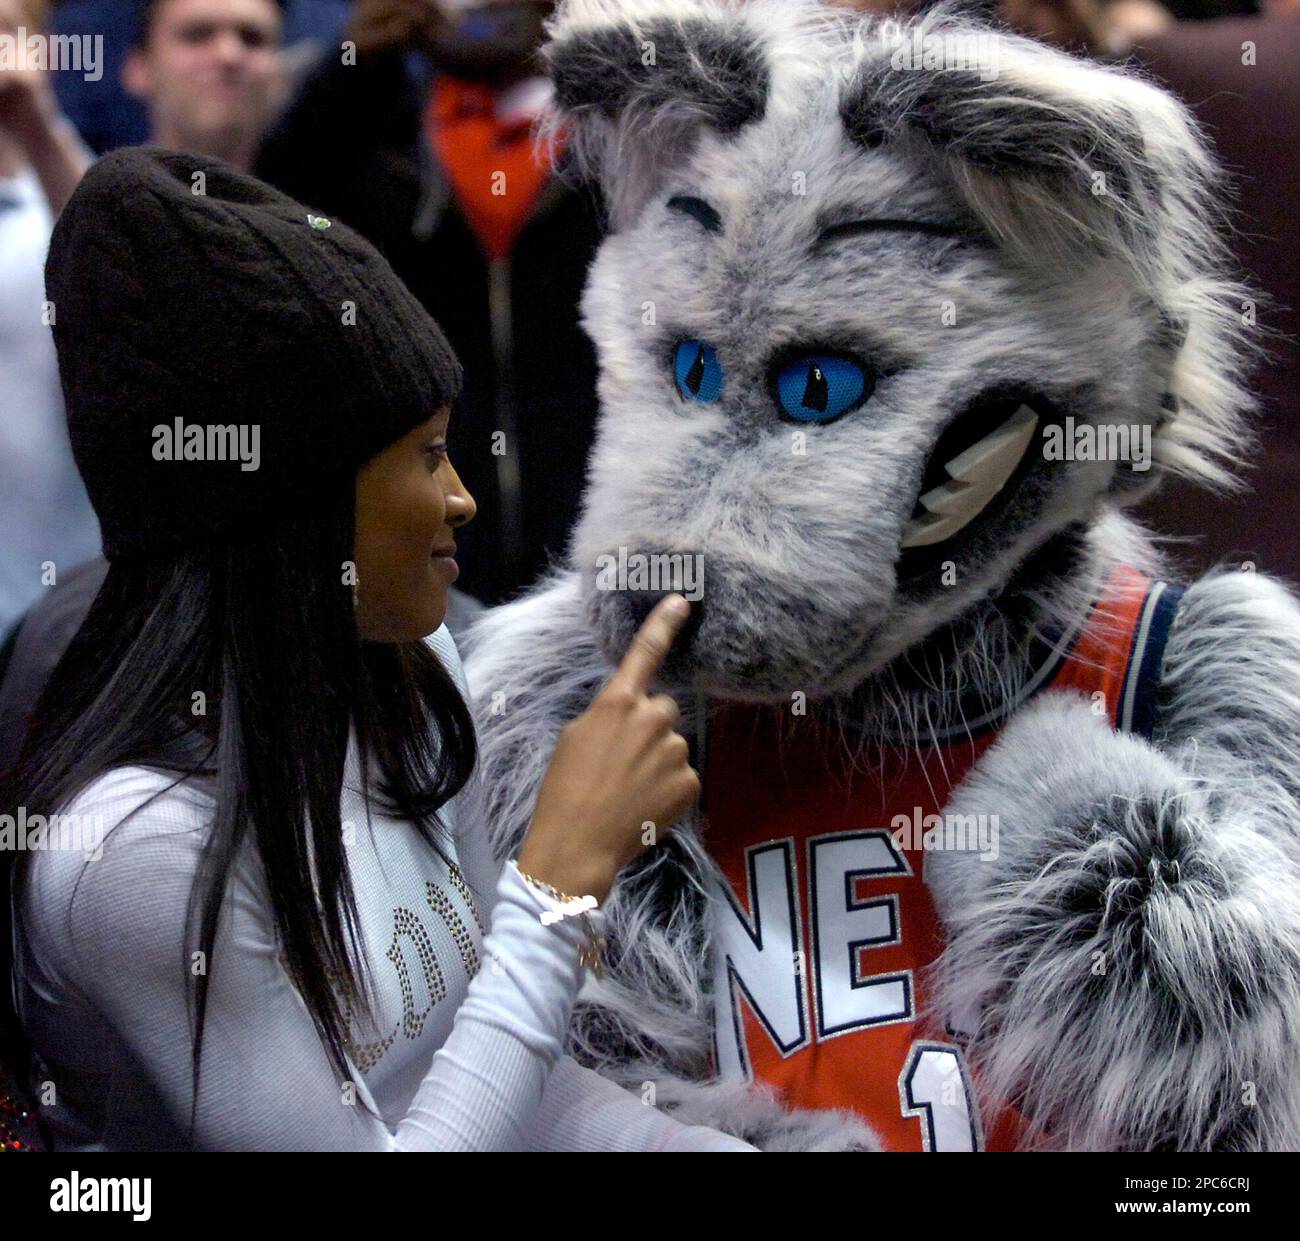 Singer Ciara hugs Sly, the Nets mascot, during NBA basketball Wednesday  night, Dec. 20, 2006 in East Rutherford, N.J. The New Jersey Nets beat the  Cleveland Cavaliers, 113-111. (AP Photo/Bill Kostroun Stock